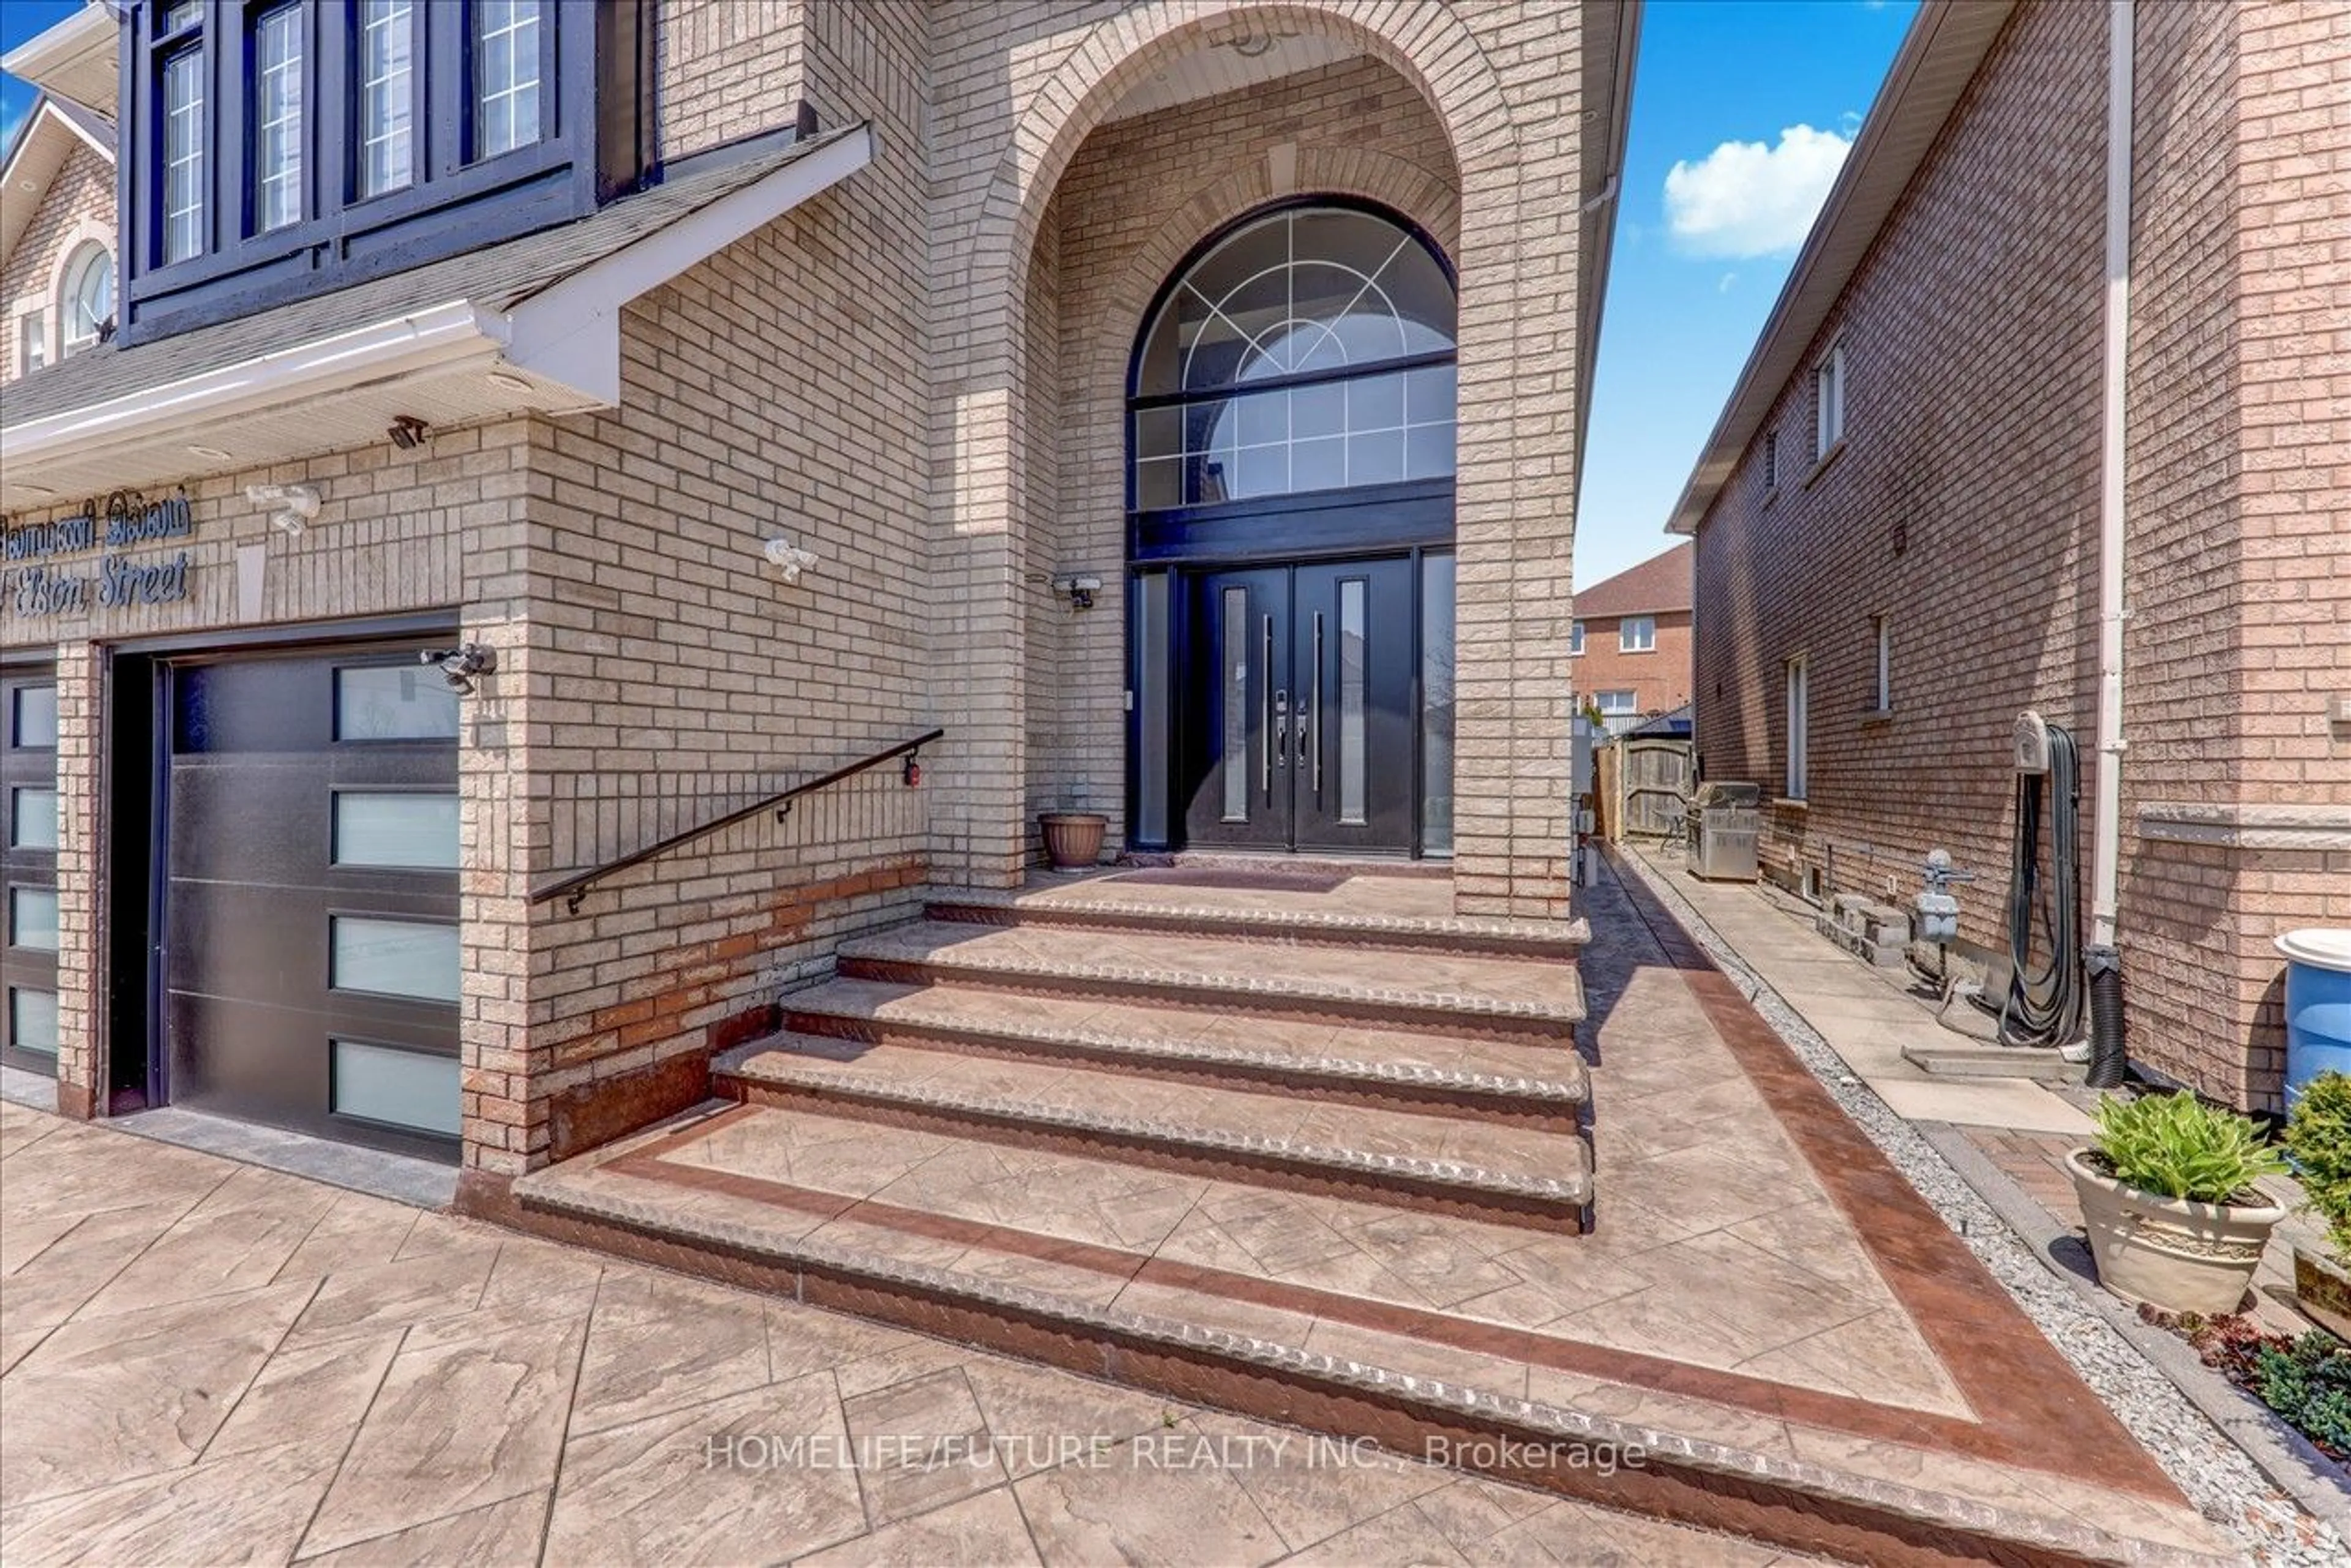 Home with brick exterior material for 304 Elson St, Markham Ontario L3S 4S4